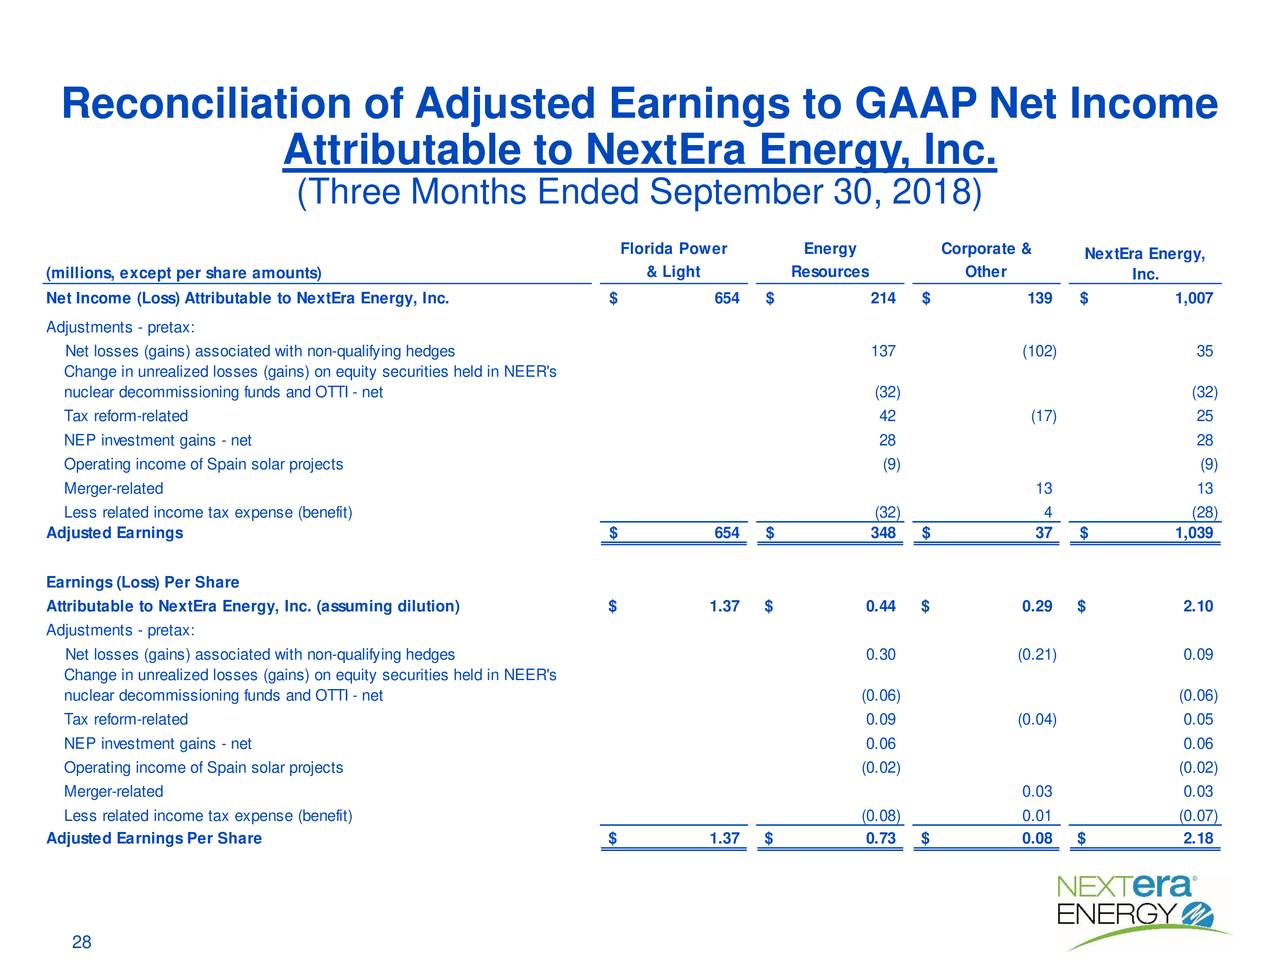 Reconciliation of Adjusted Earnings to GAAP Net Income